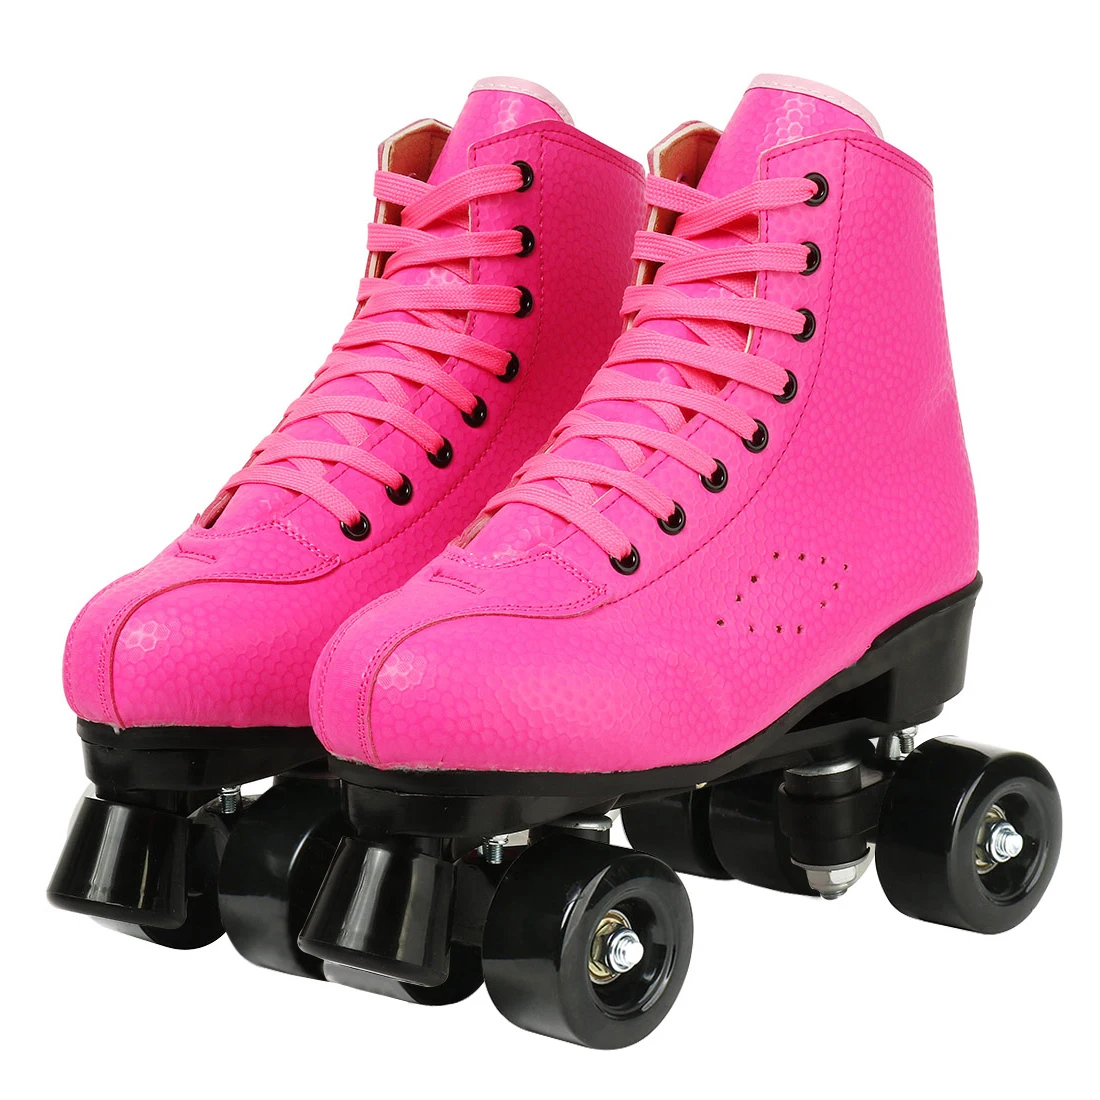 Details about   Double Row Roller Skate Genuine Leather Black Boot Pink 4 Wheels Skating Shoes 